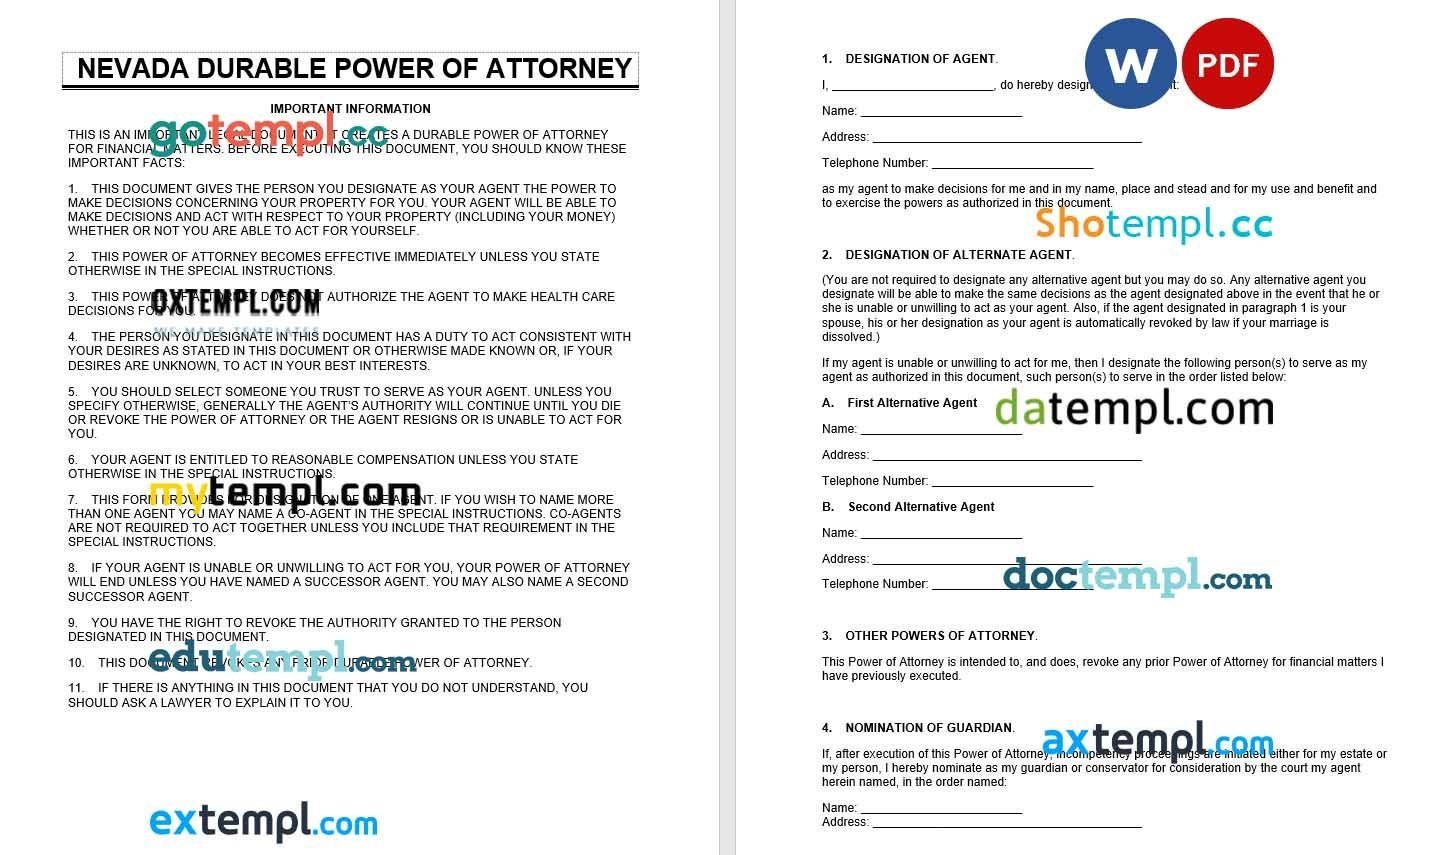 Nevada Durable Power of Attorney example, fully editable